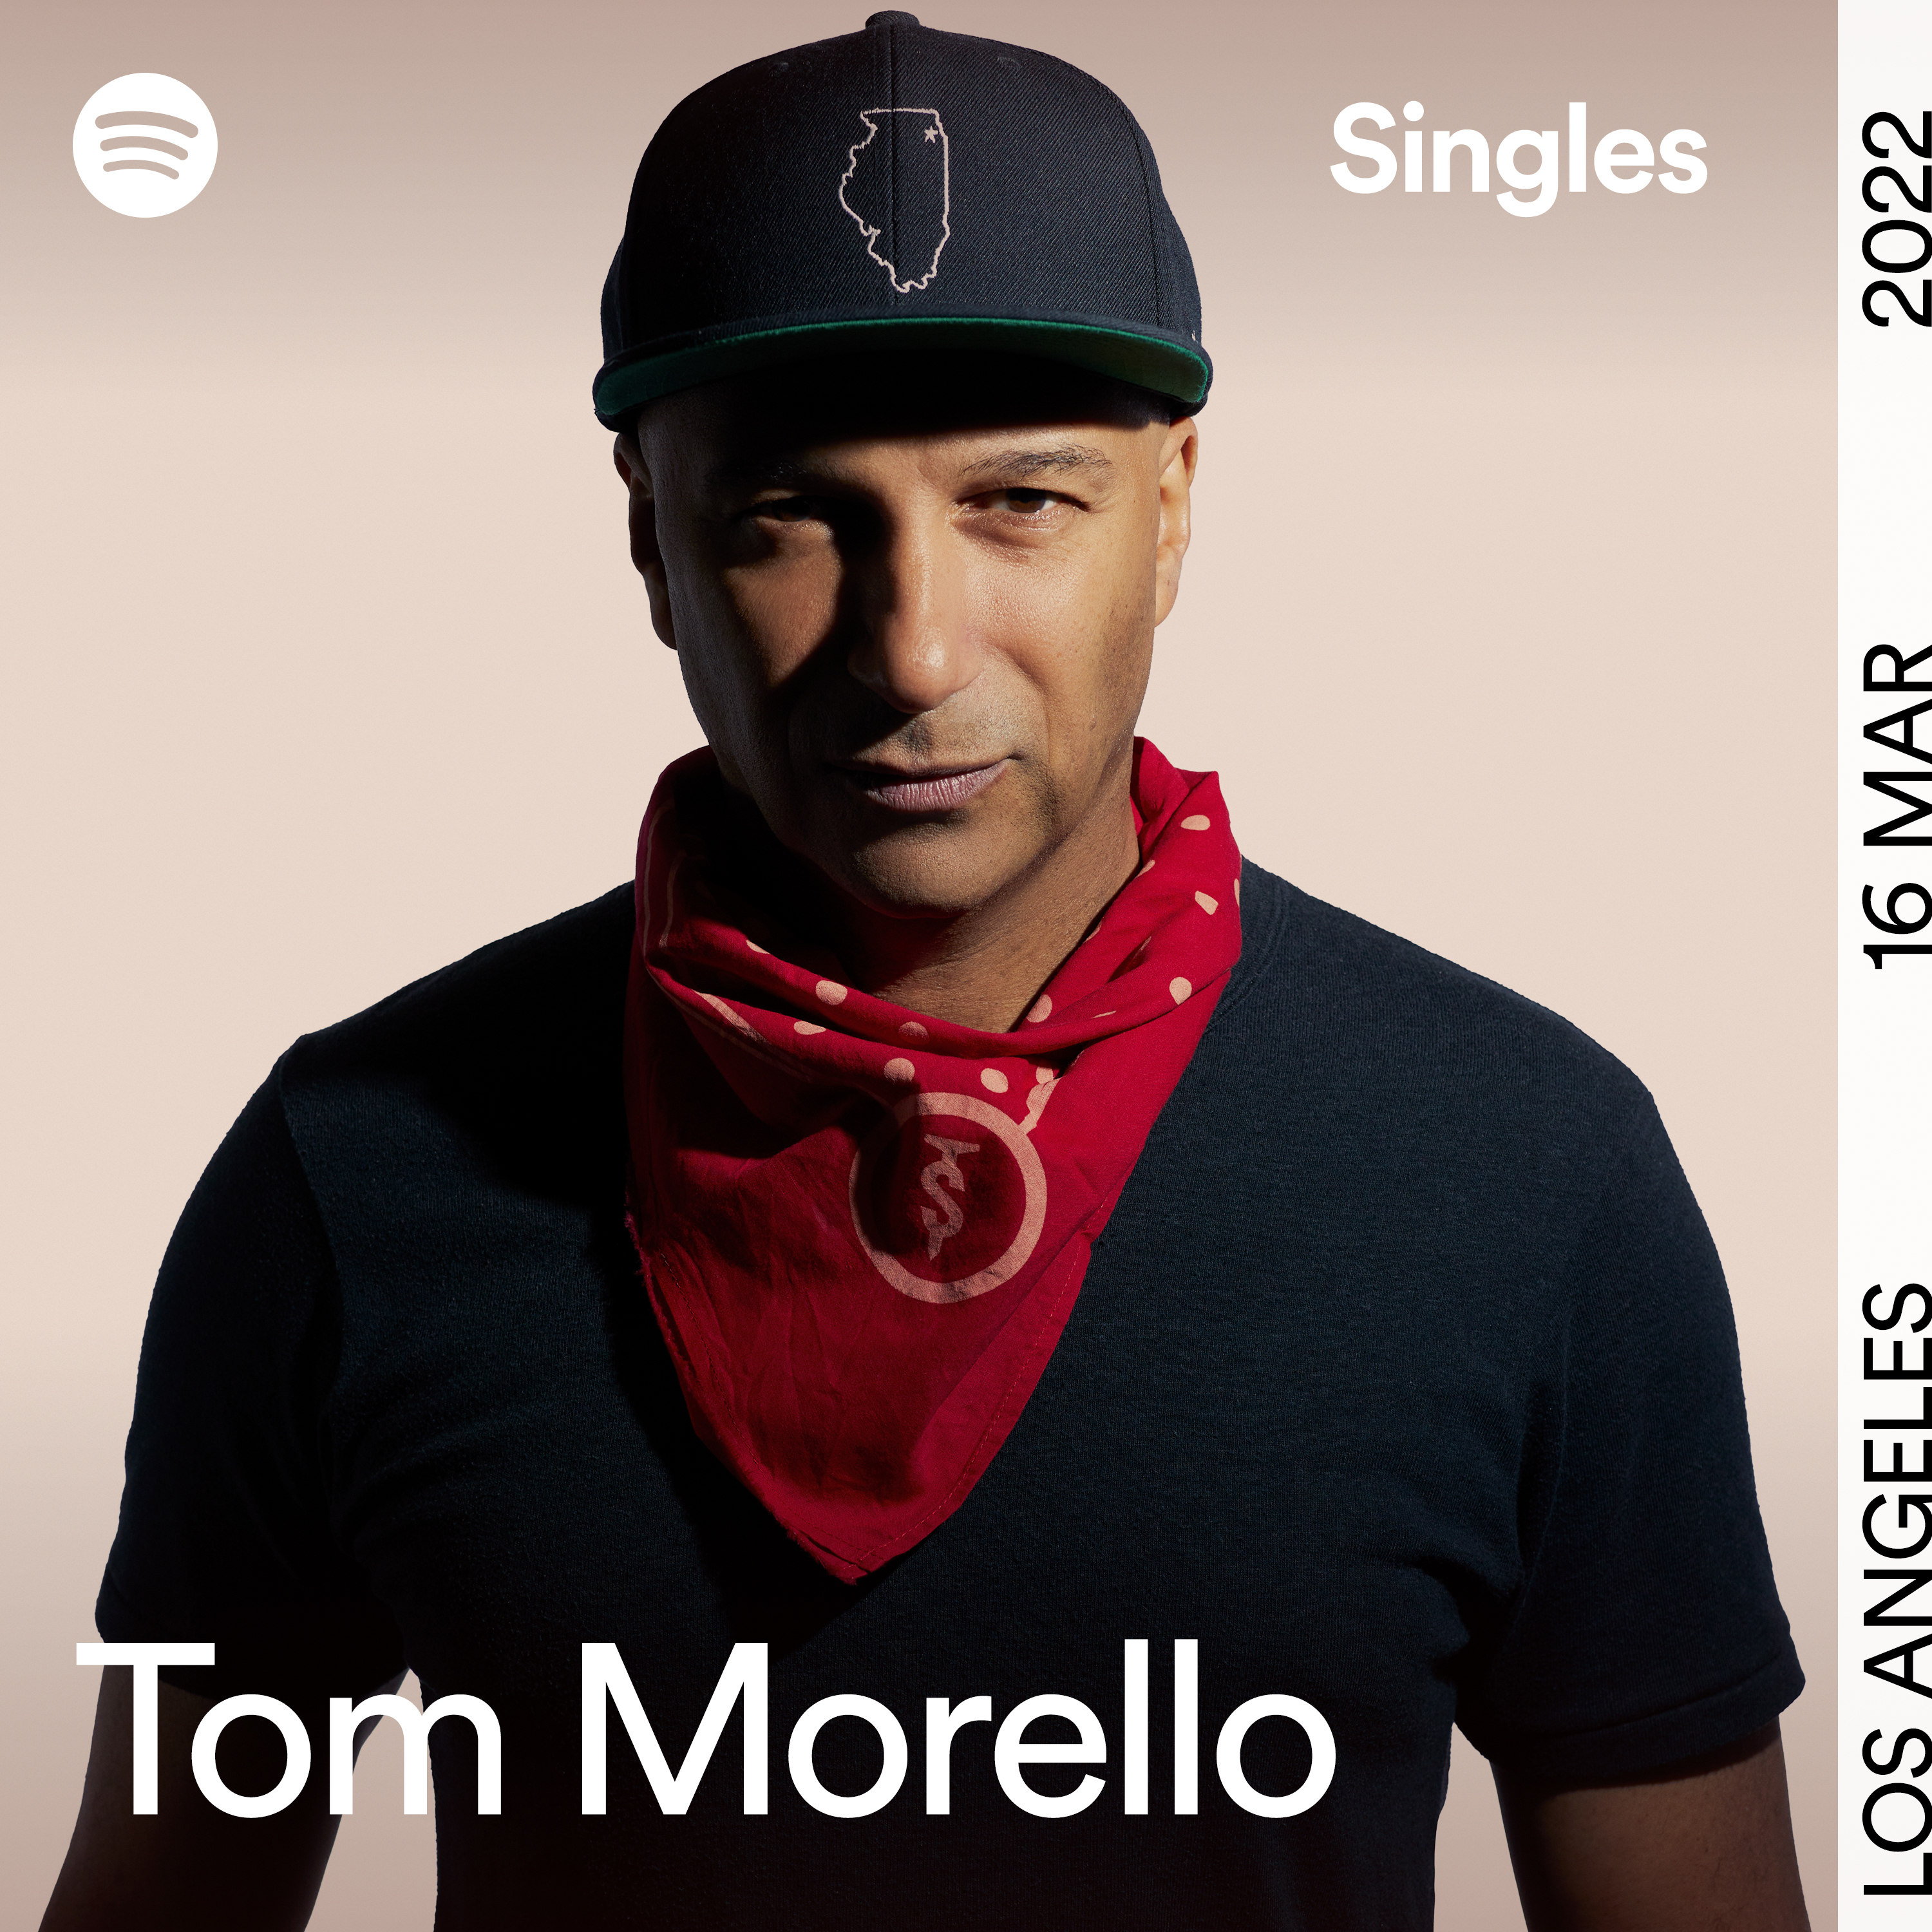 Tom Morello covers Tom Waits w/ Sam from X Ambassadors for Spotify Singles